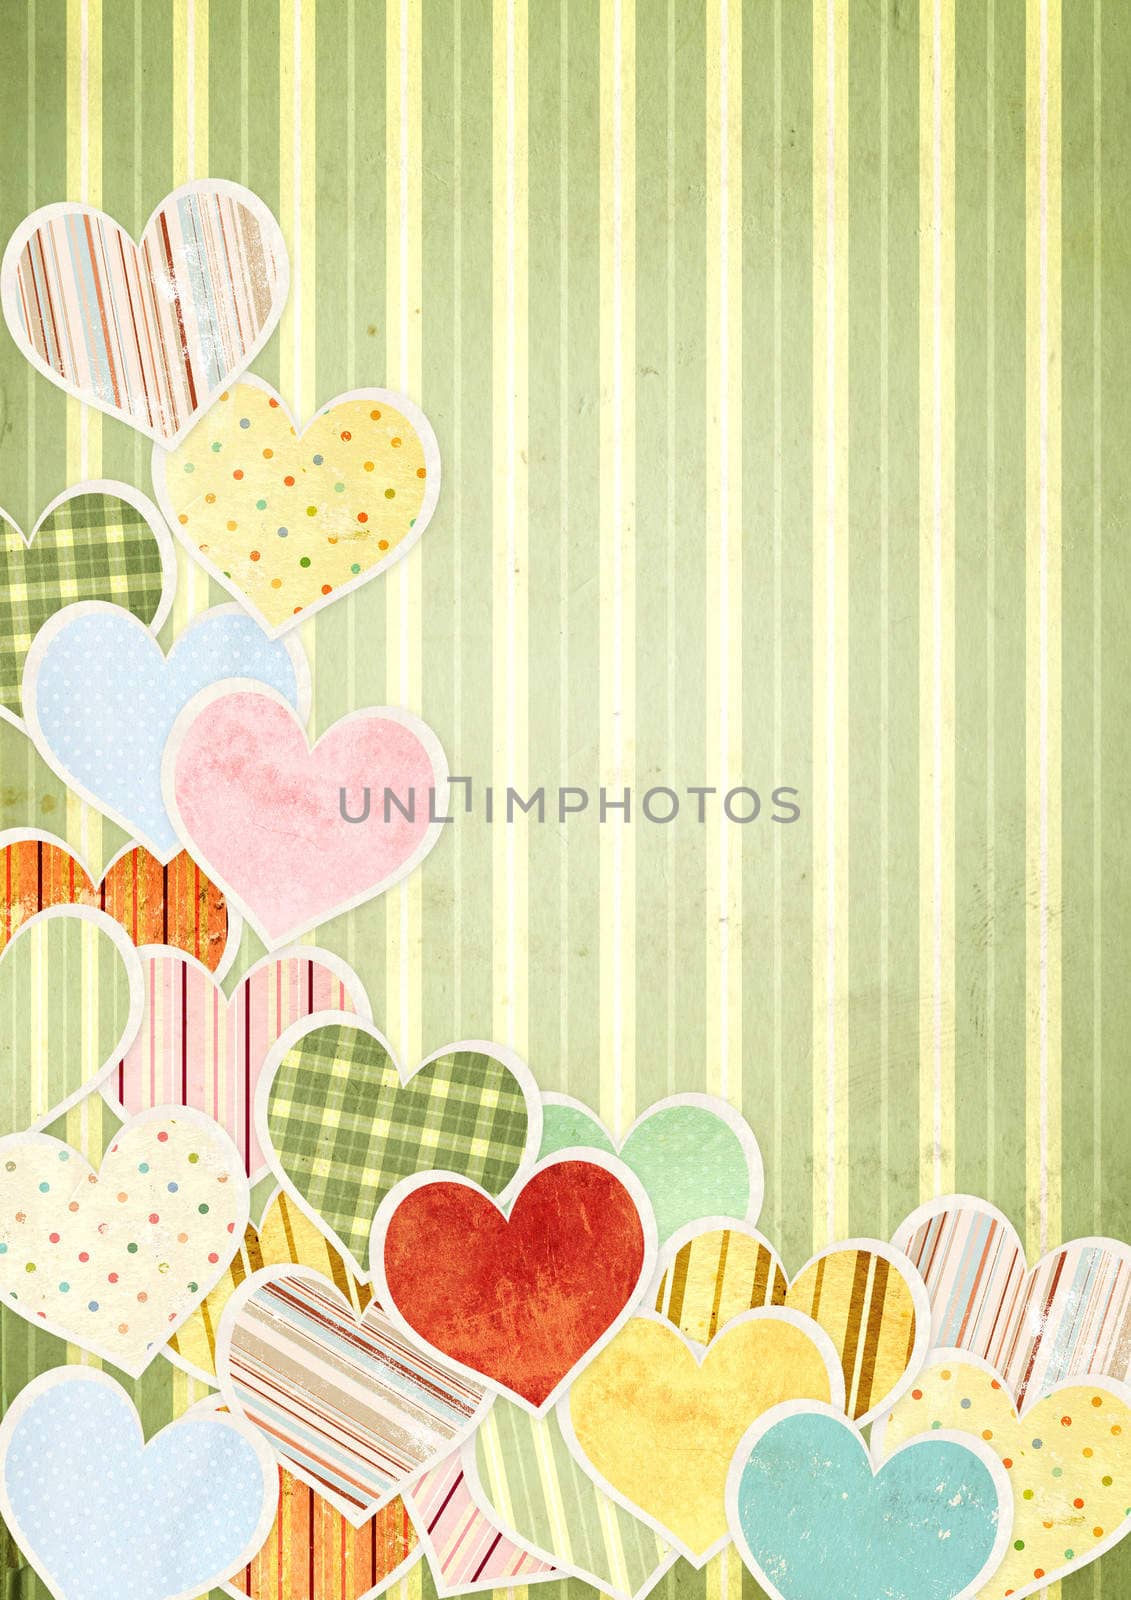 Valentine background with paper hearts